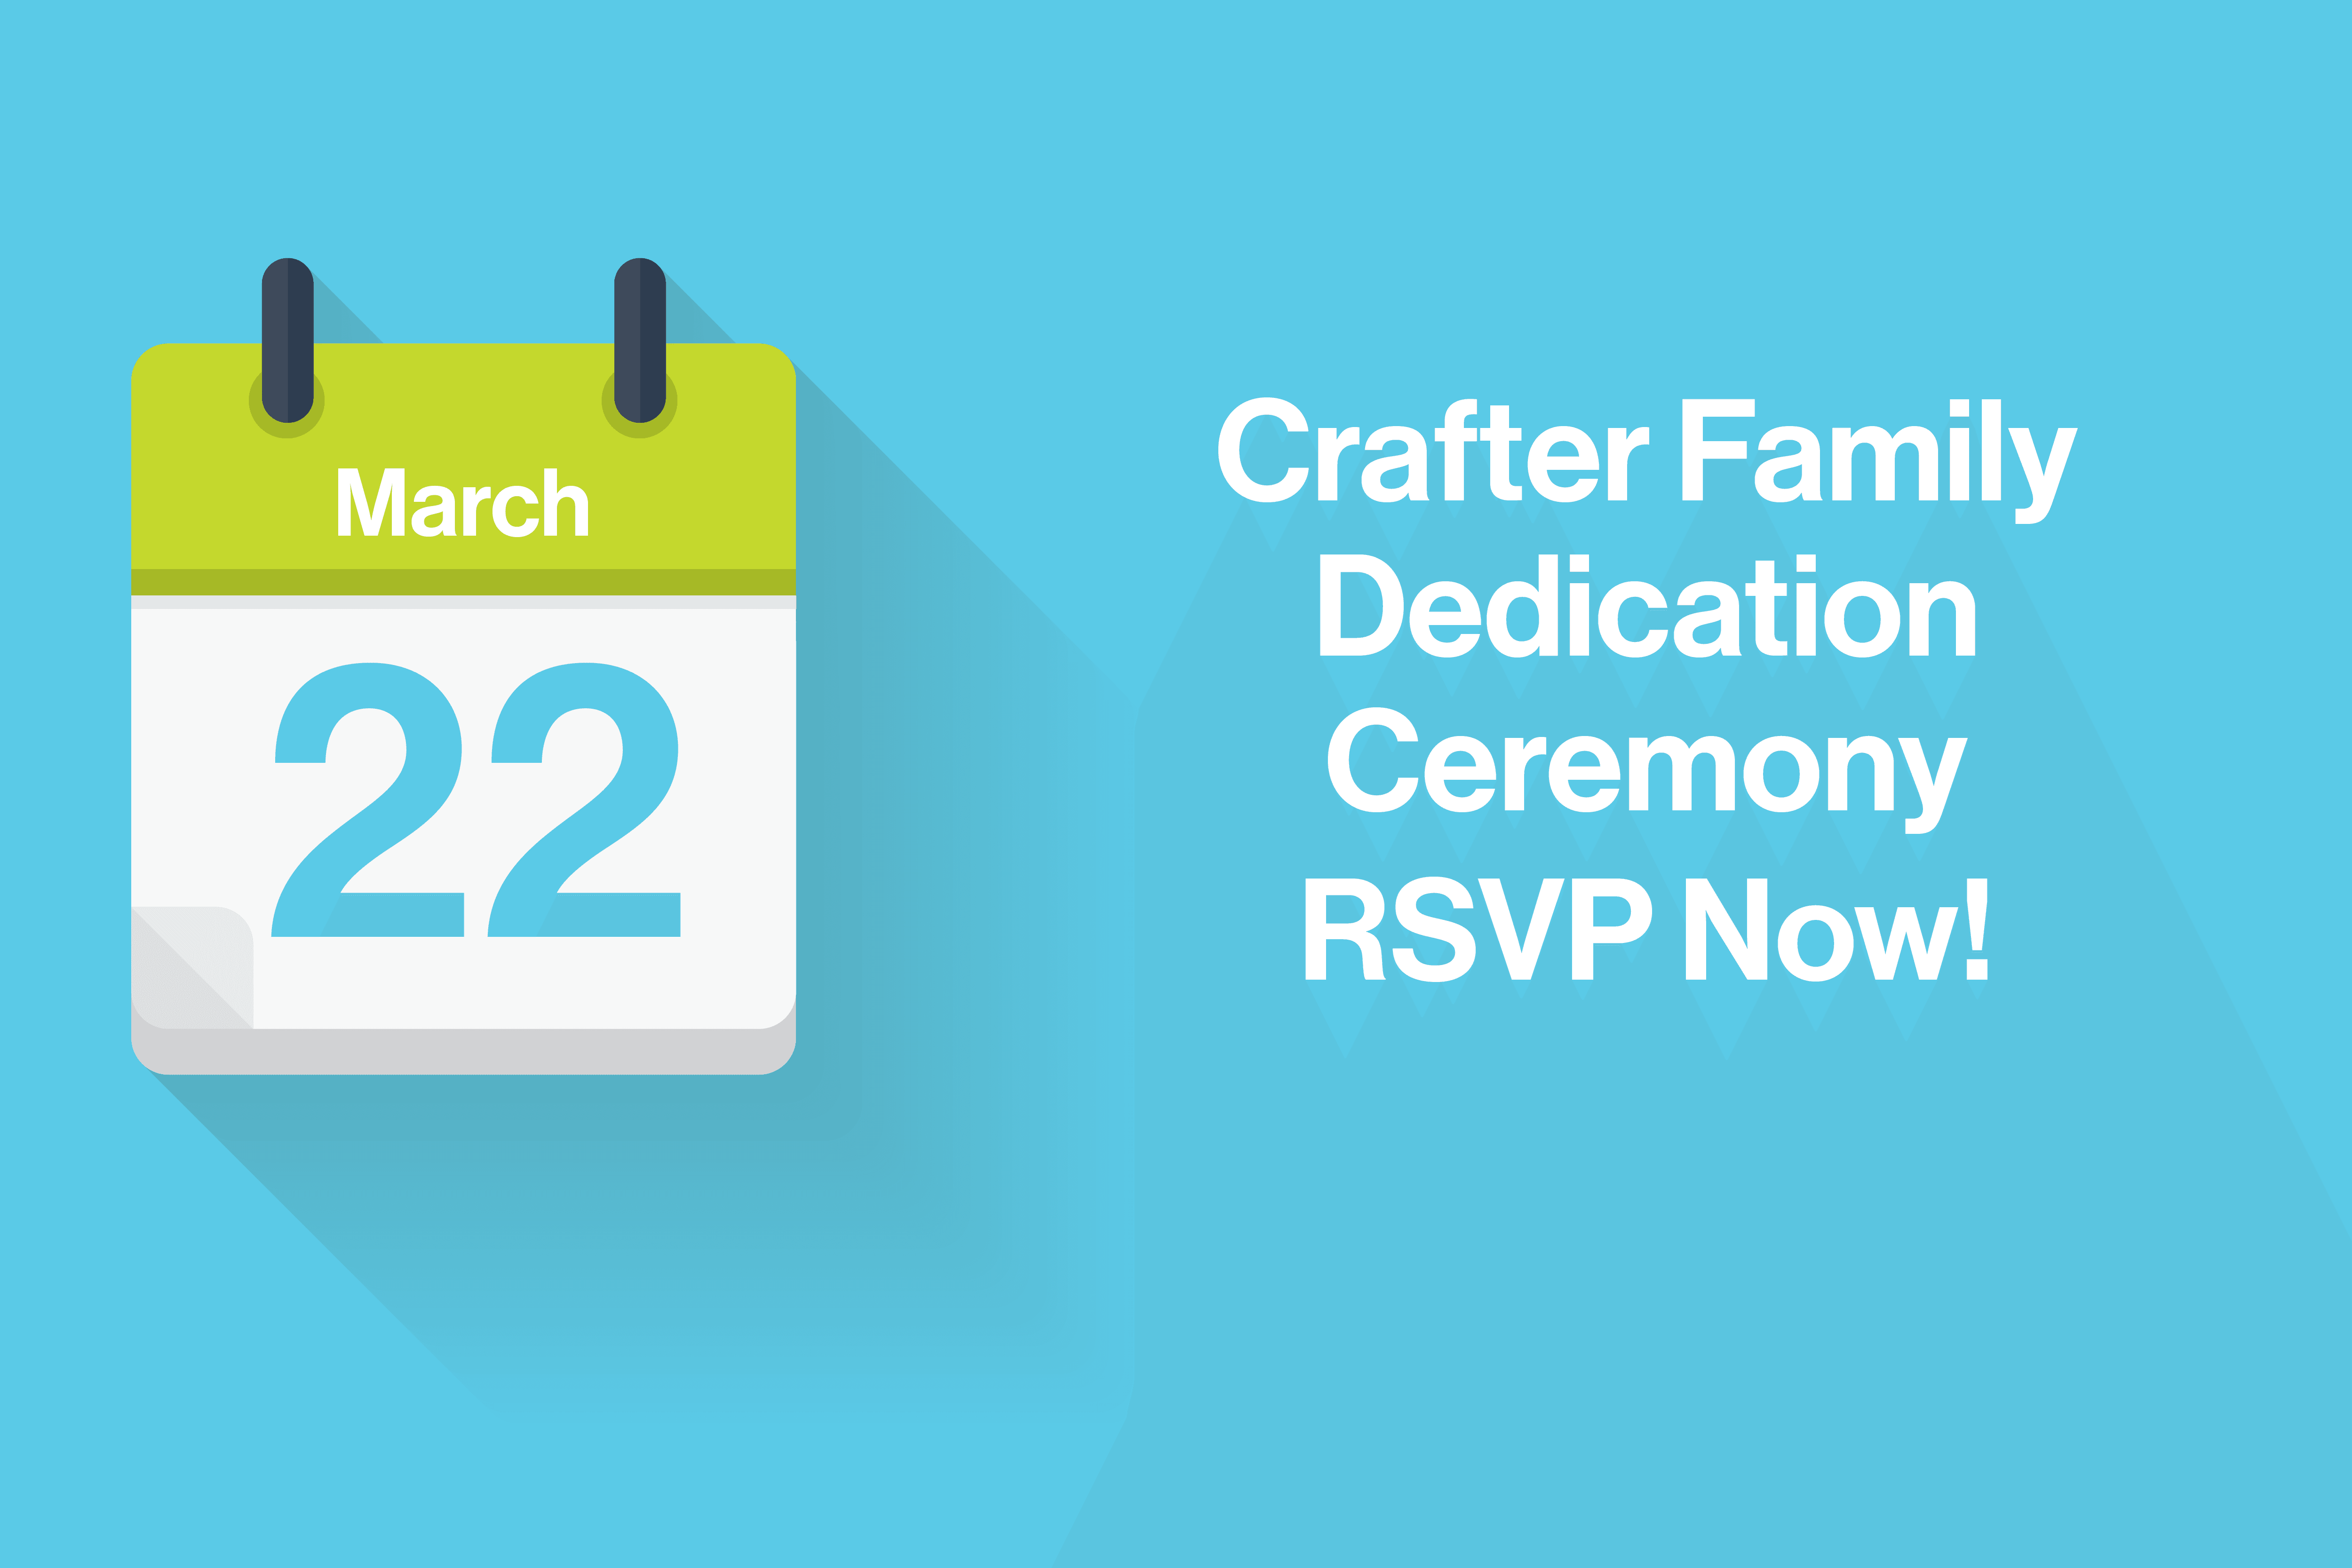 Crafter Family Dedication Ceremony